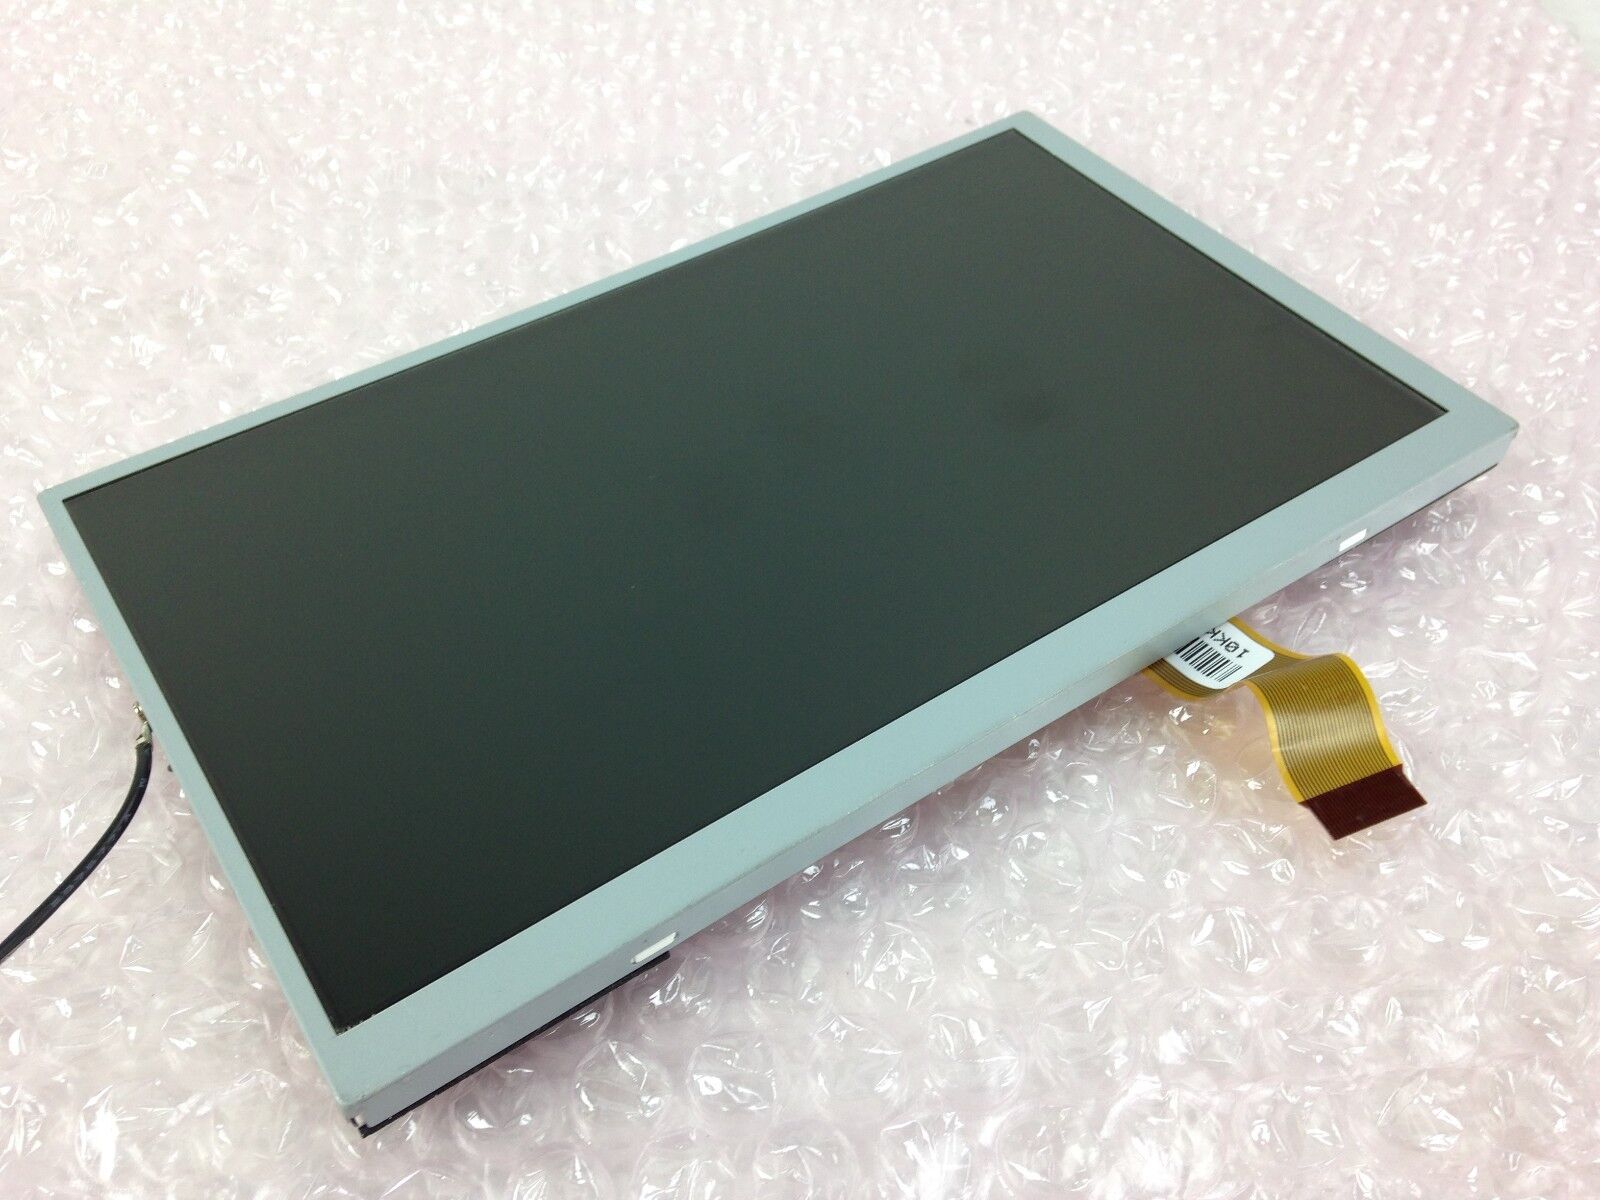 CLAA070LD0DCW 7" LCD Panel Screen 1024 x 768 Display Assembly